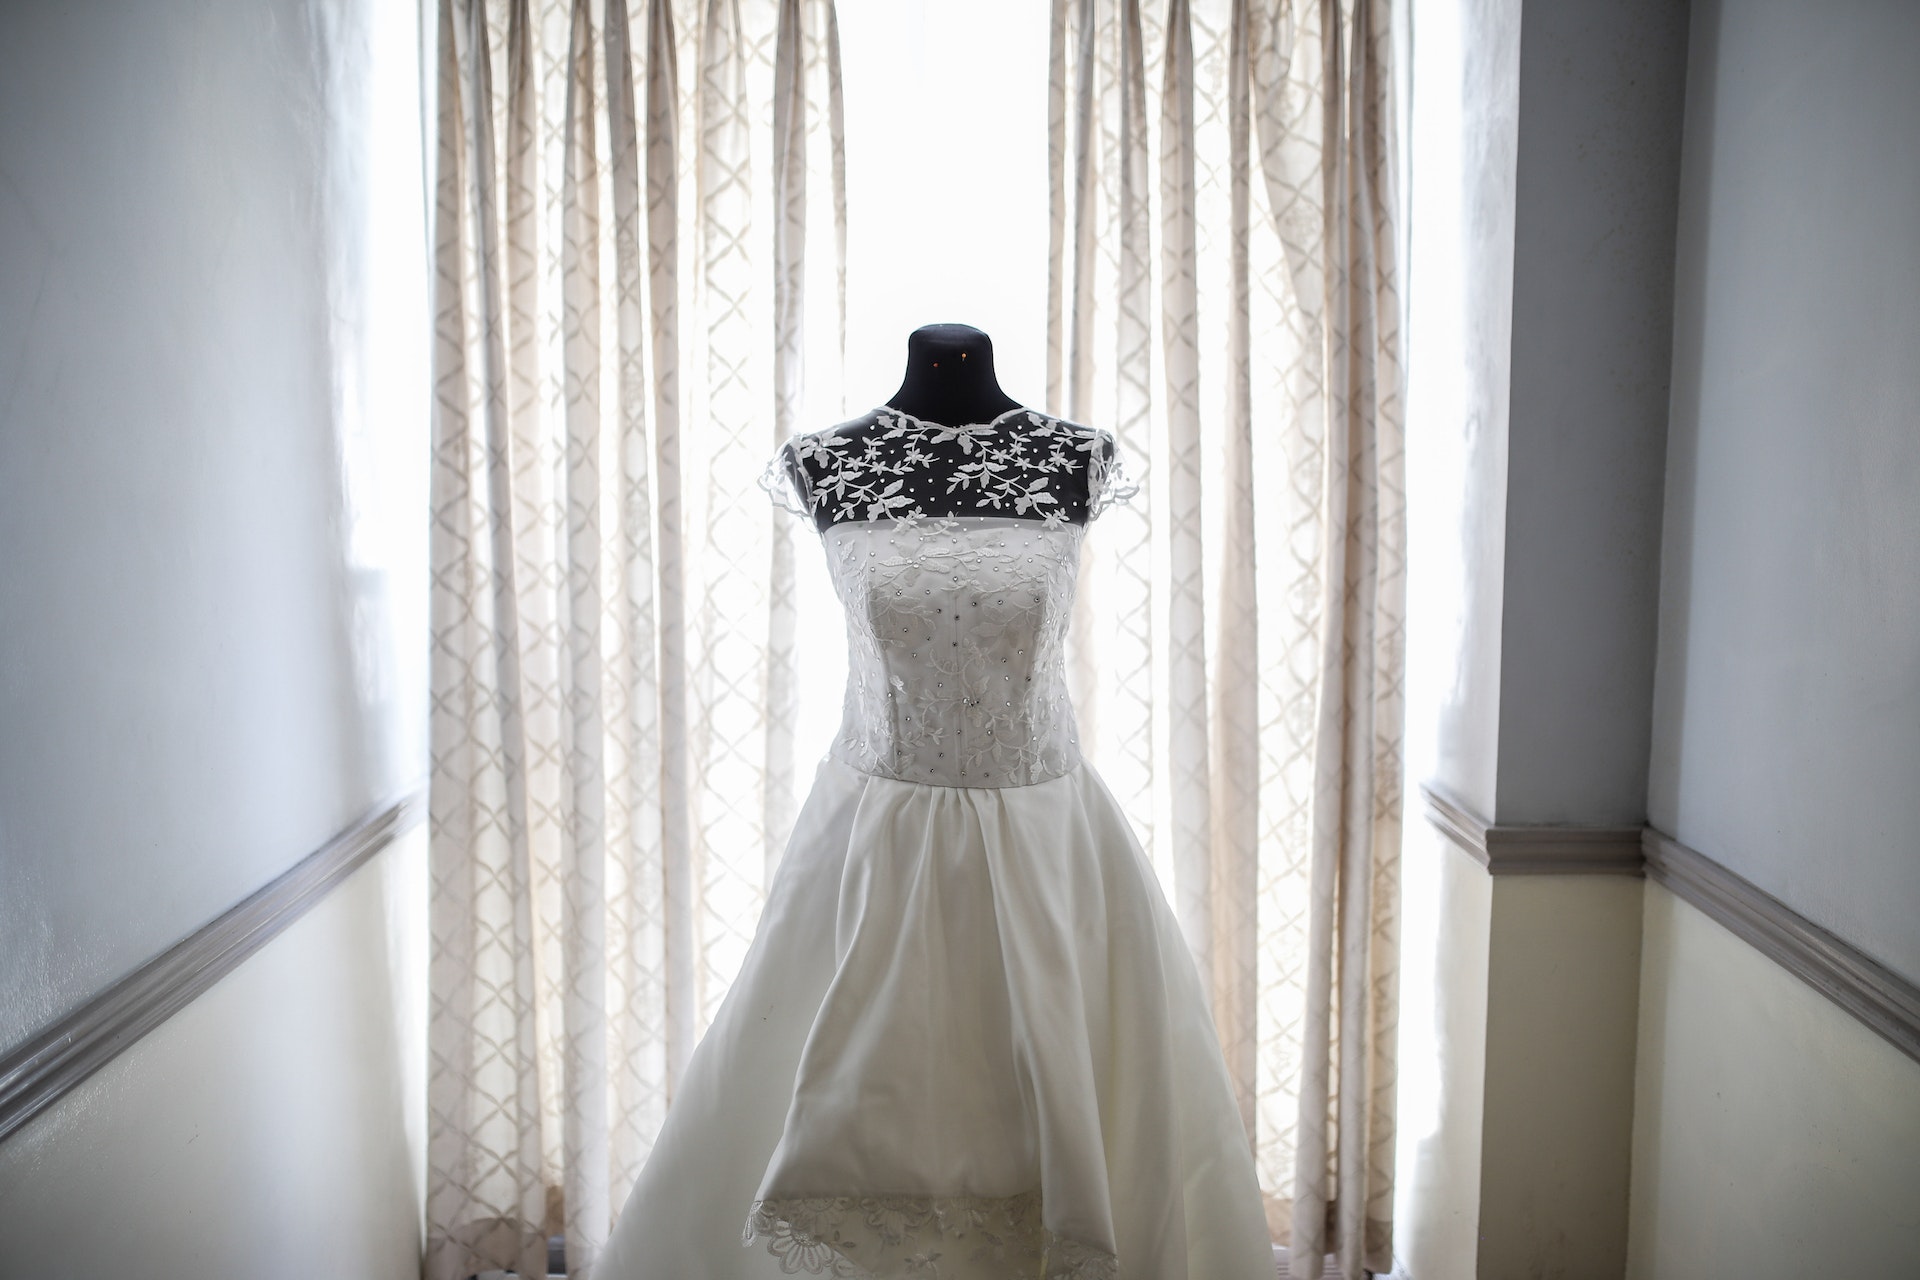 A white bridal gown | Source: Pexels